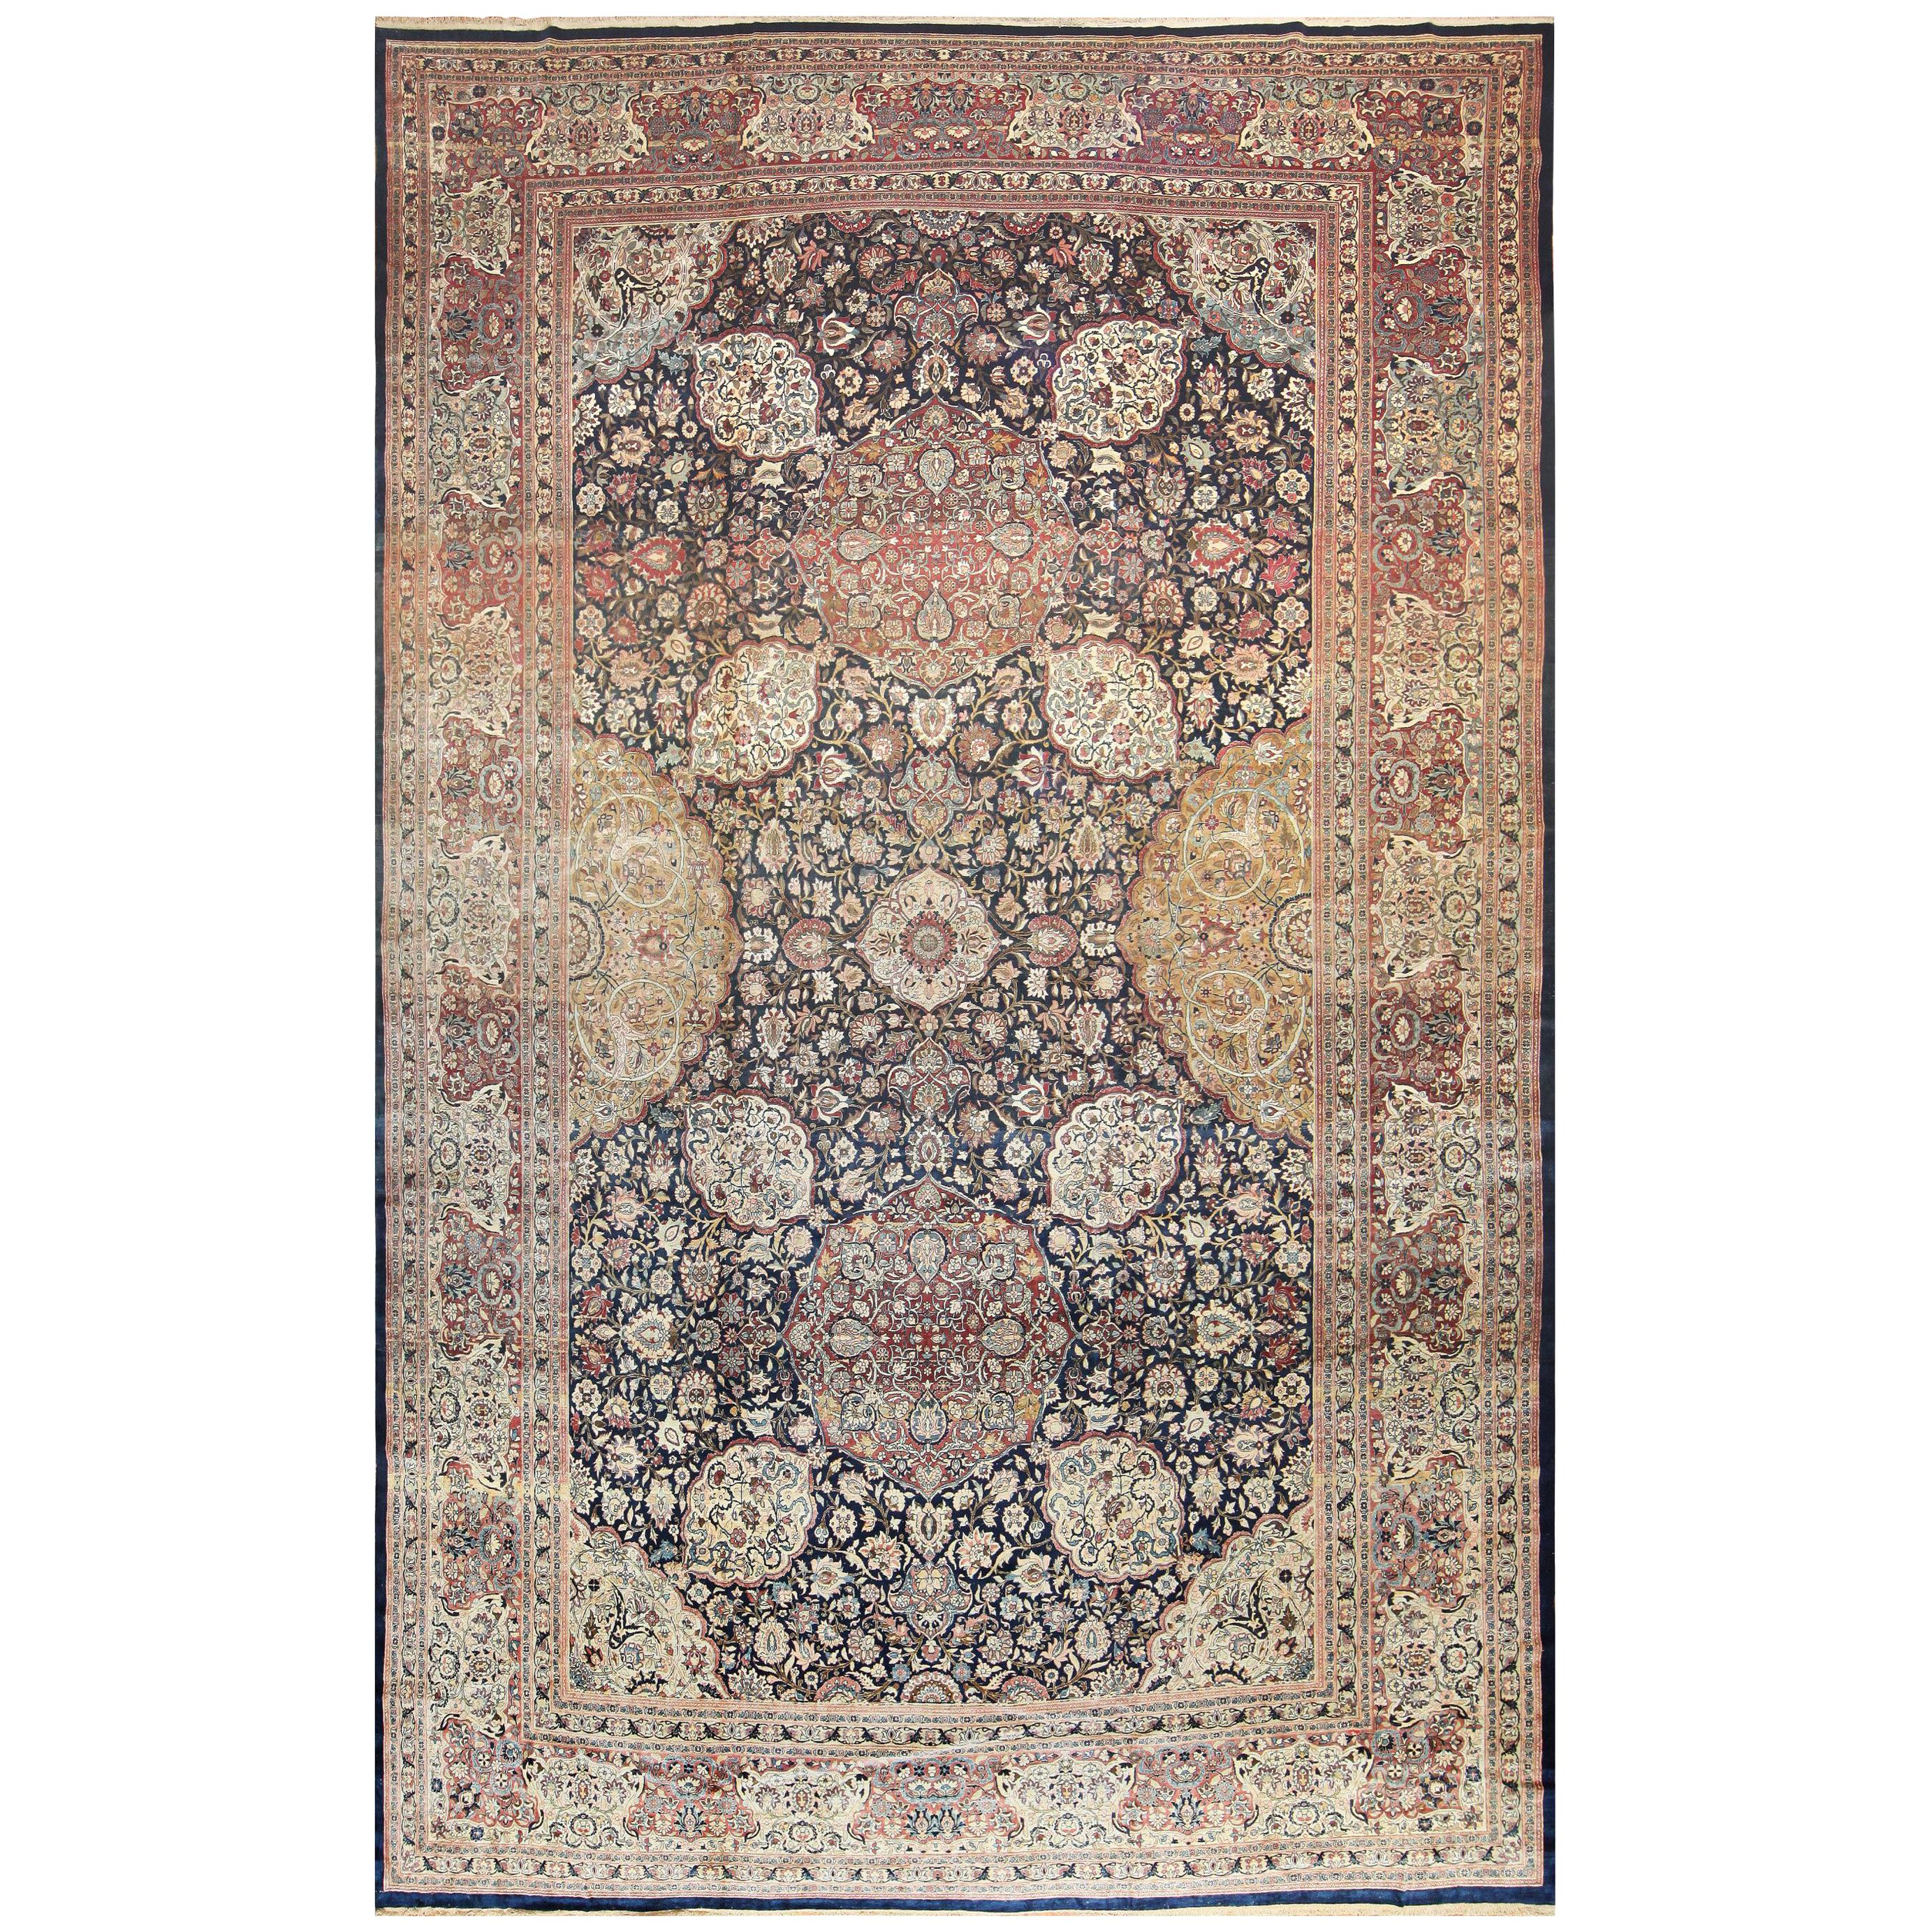 Oversized Antique Tehran Persian Carpet. Size: 14 ft 3 in x 22 ft 3 in